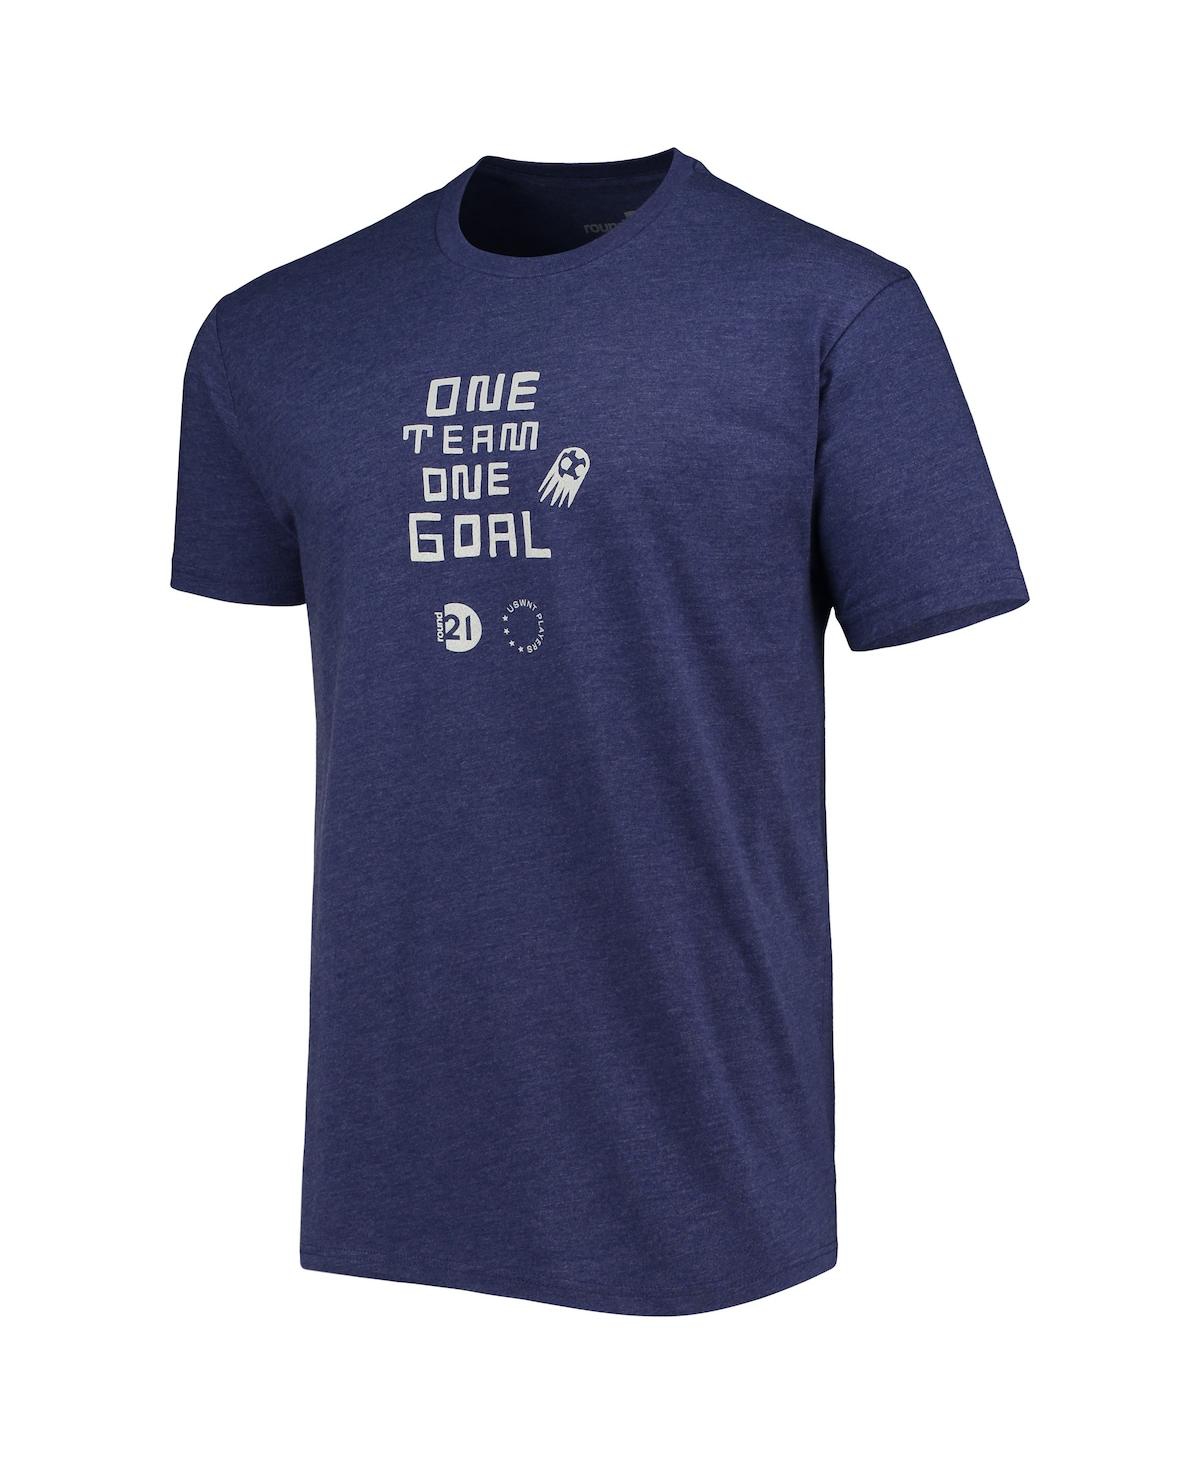 Shop Round21 Men's  Crystal Dunn Navy Uswnt One Team One Goal T-shirt